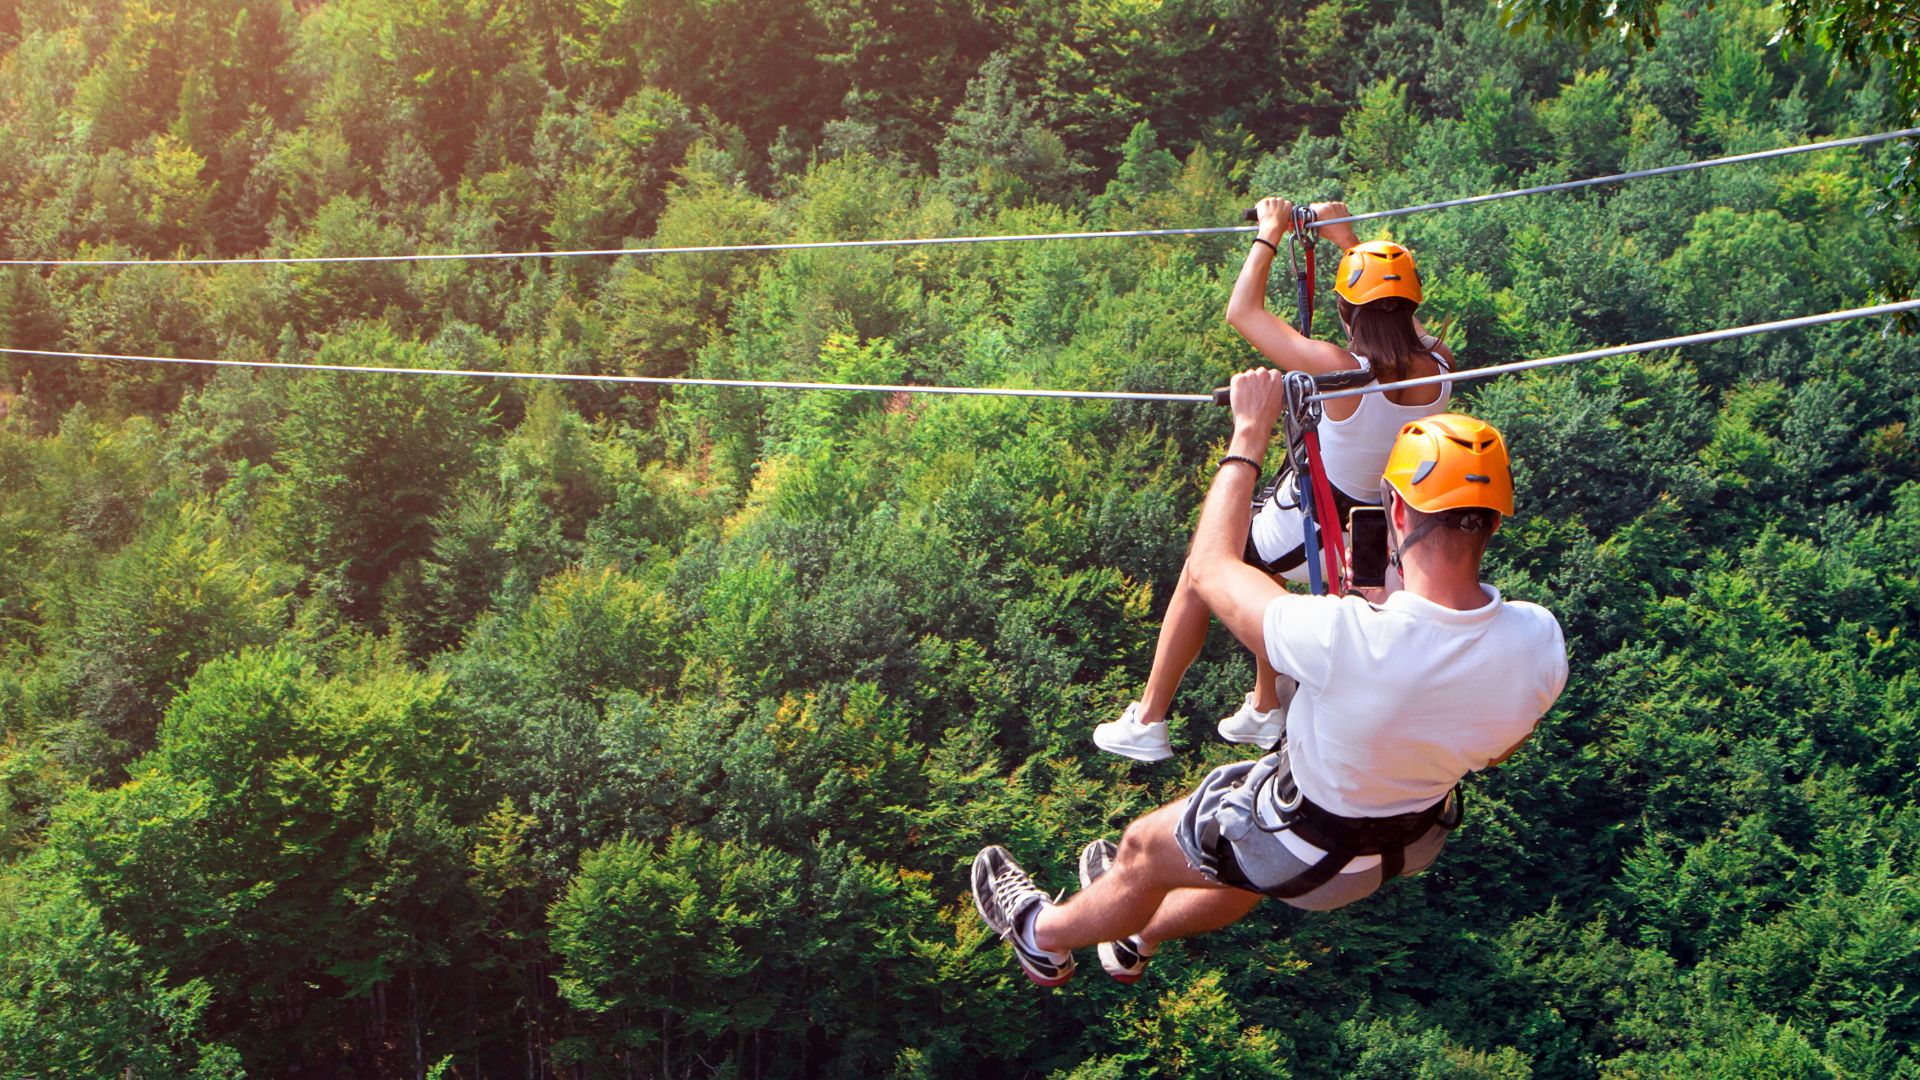 Two people zip lining over a forested area.